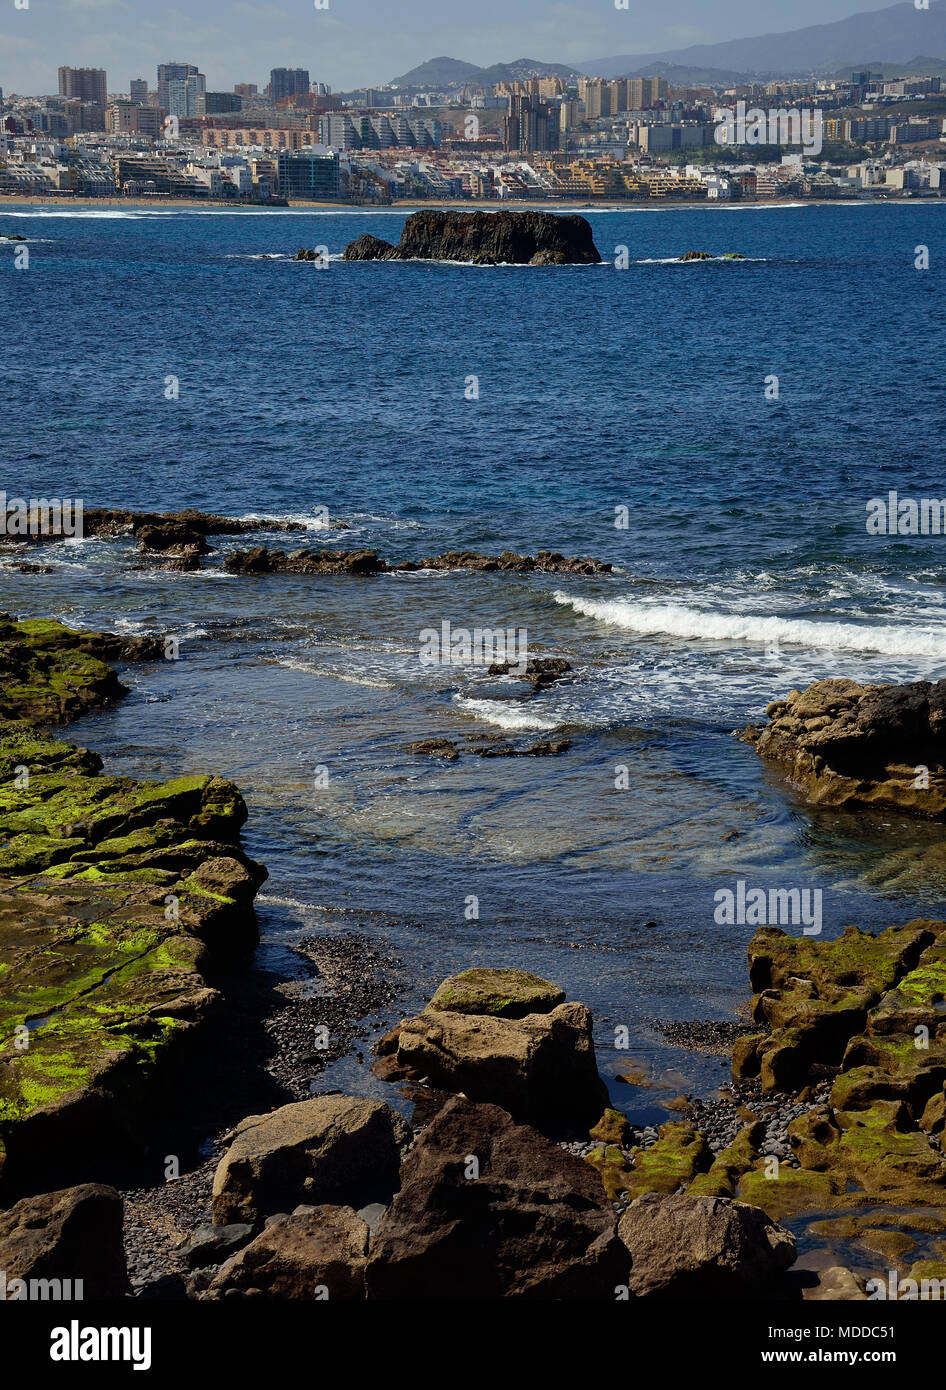 Coast at low tide in foreground and city in background, The confital and Las  palmas of Gran canaria Stock Photo - Alamy